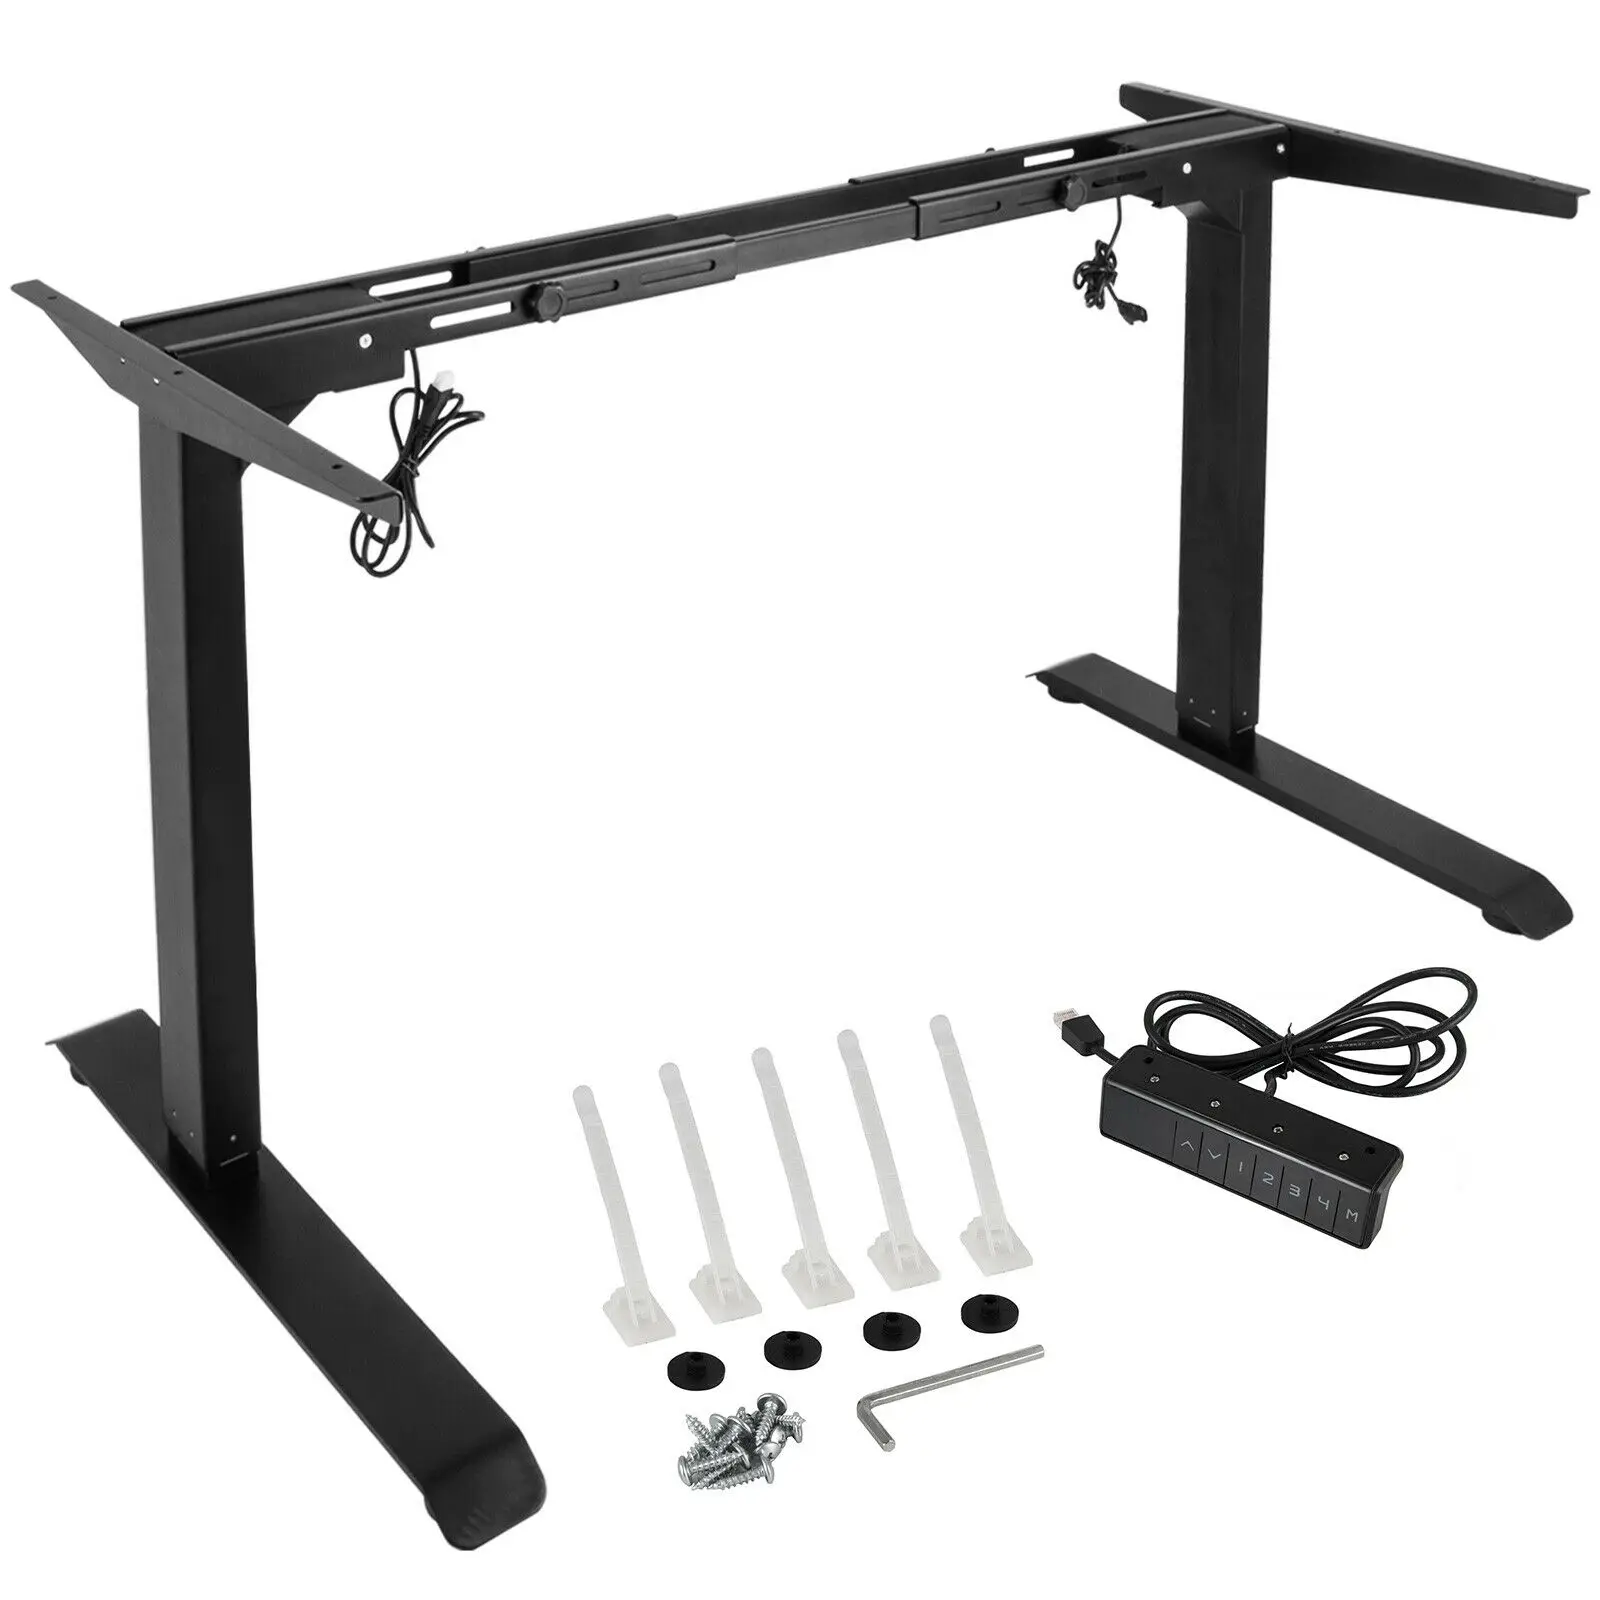 Electric Height Adjustable Standing Desk Frame Single Motor and Memory Control 